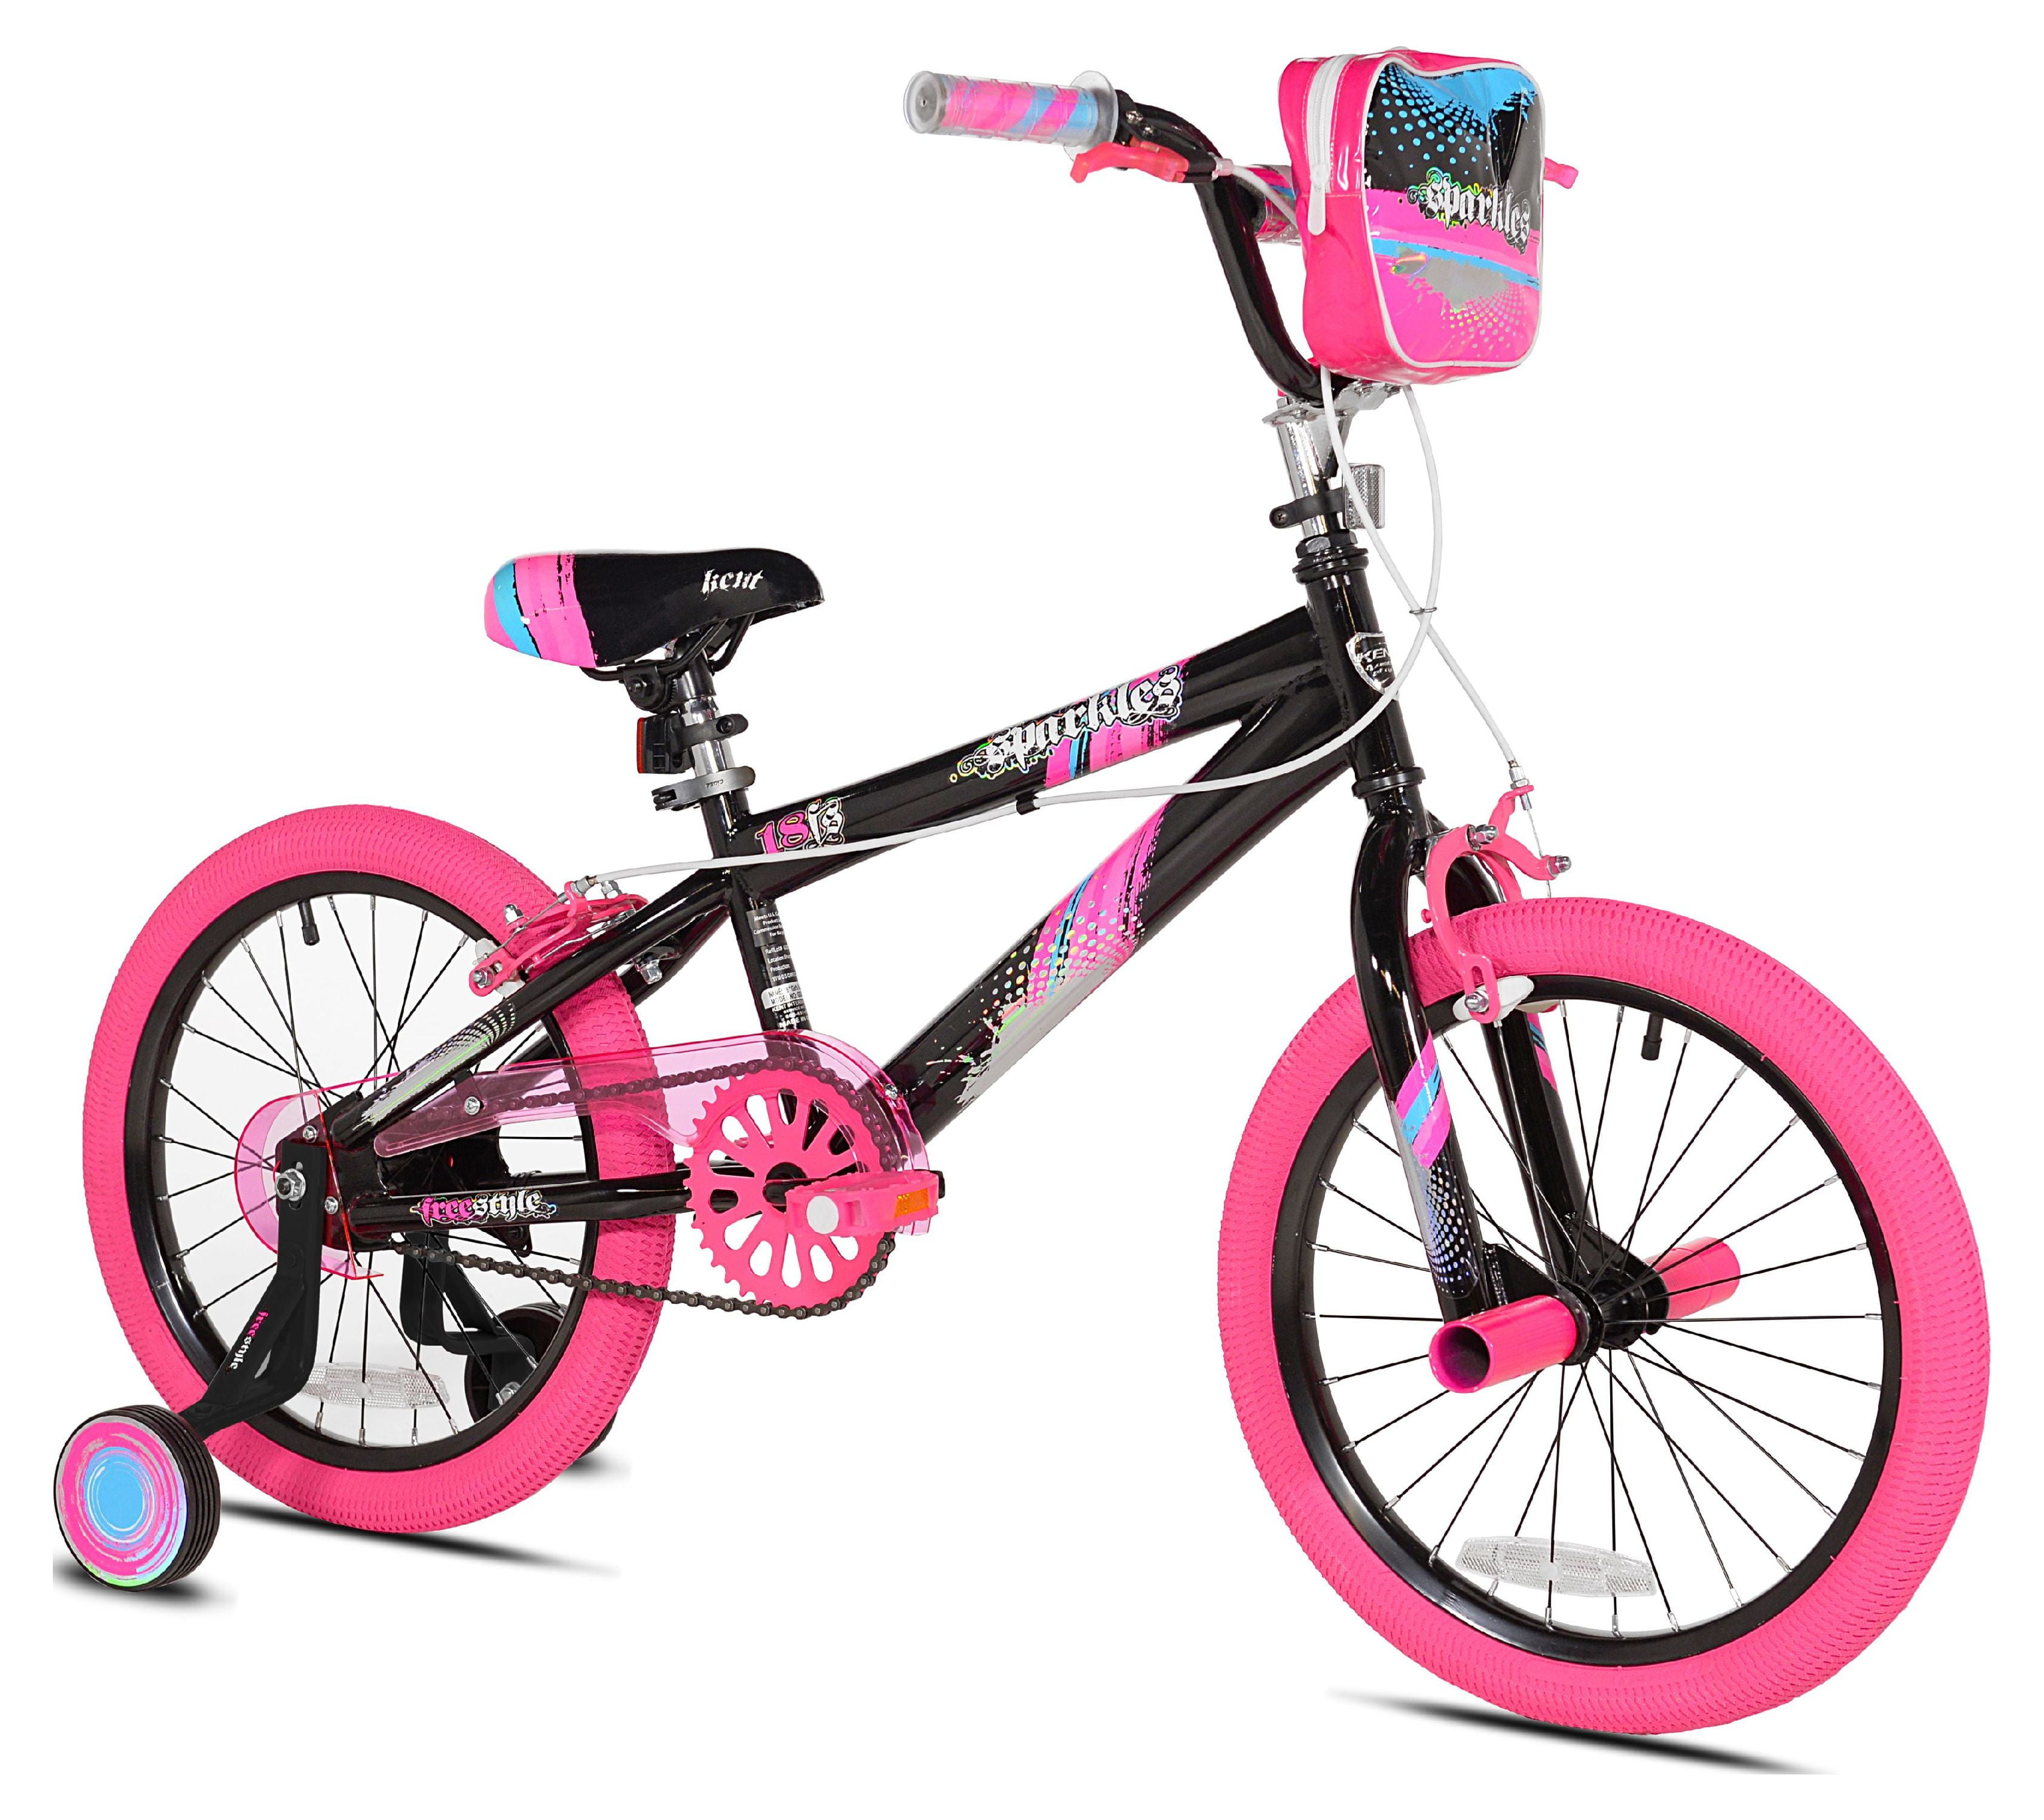 Kent Bicycles 18 inch Girl's Sparkles Bicycle, Black and Pink